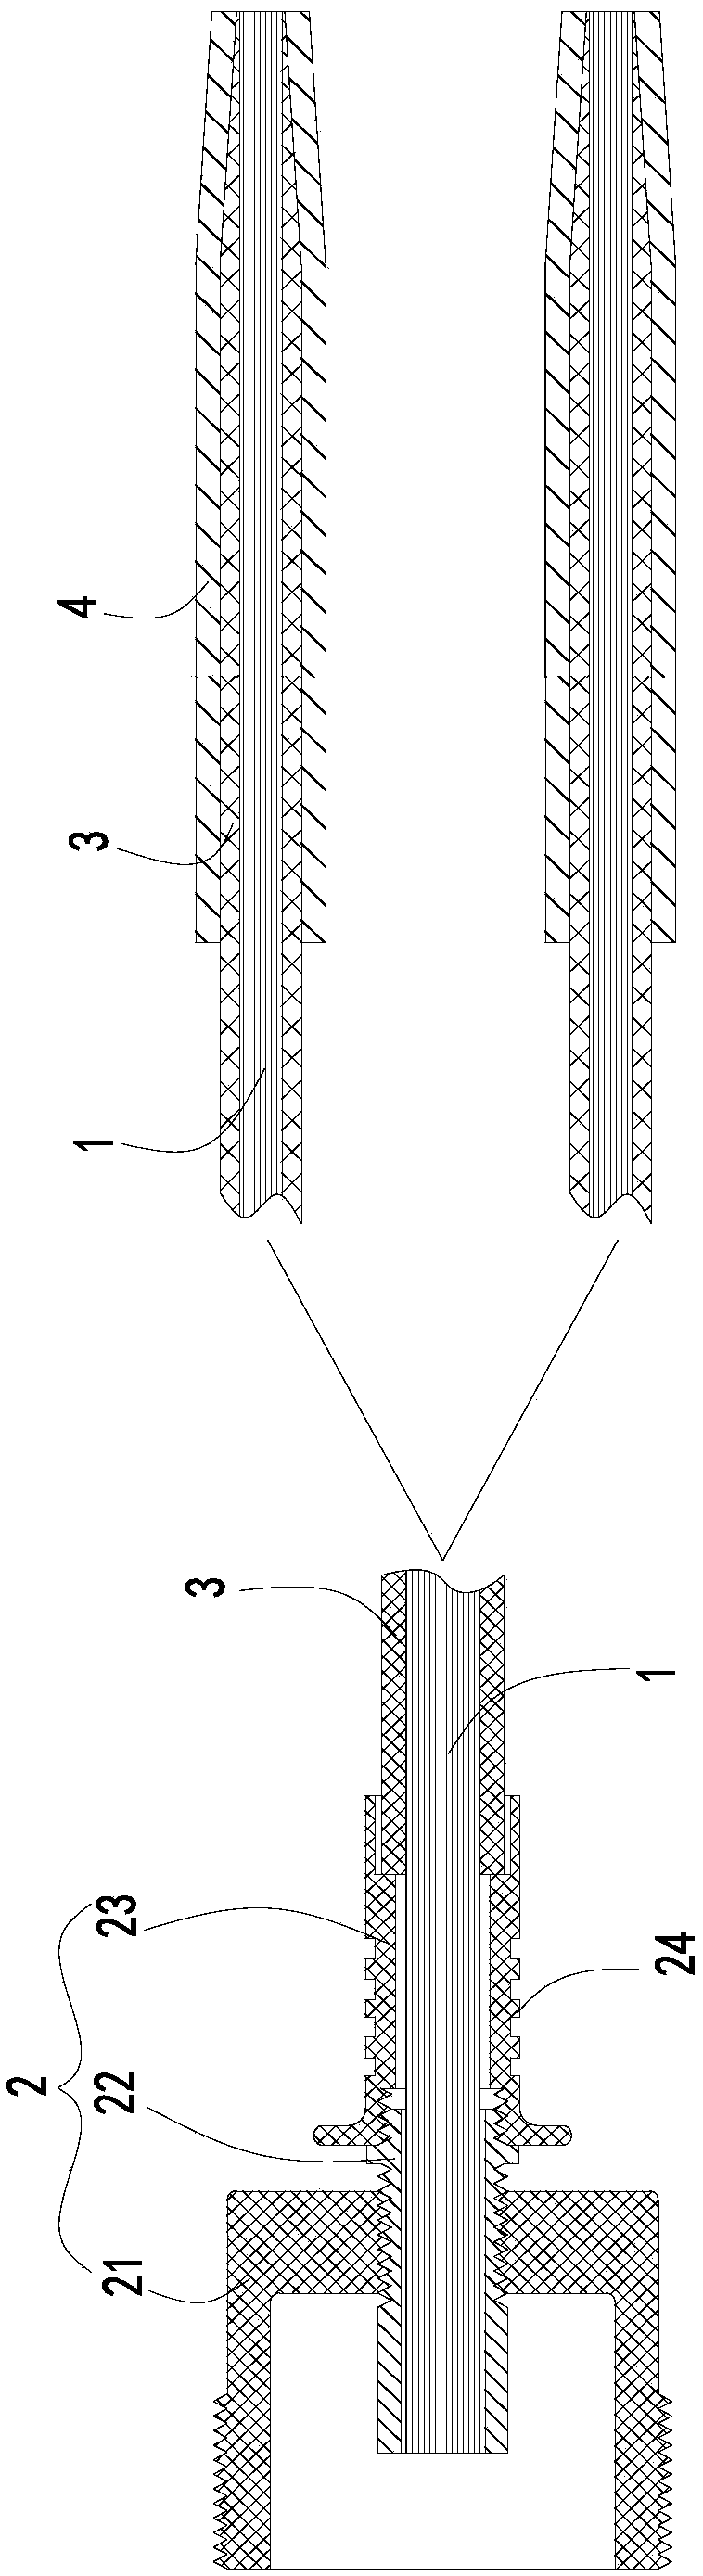 Ear-nose-throat red-light treatment device